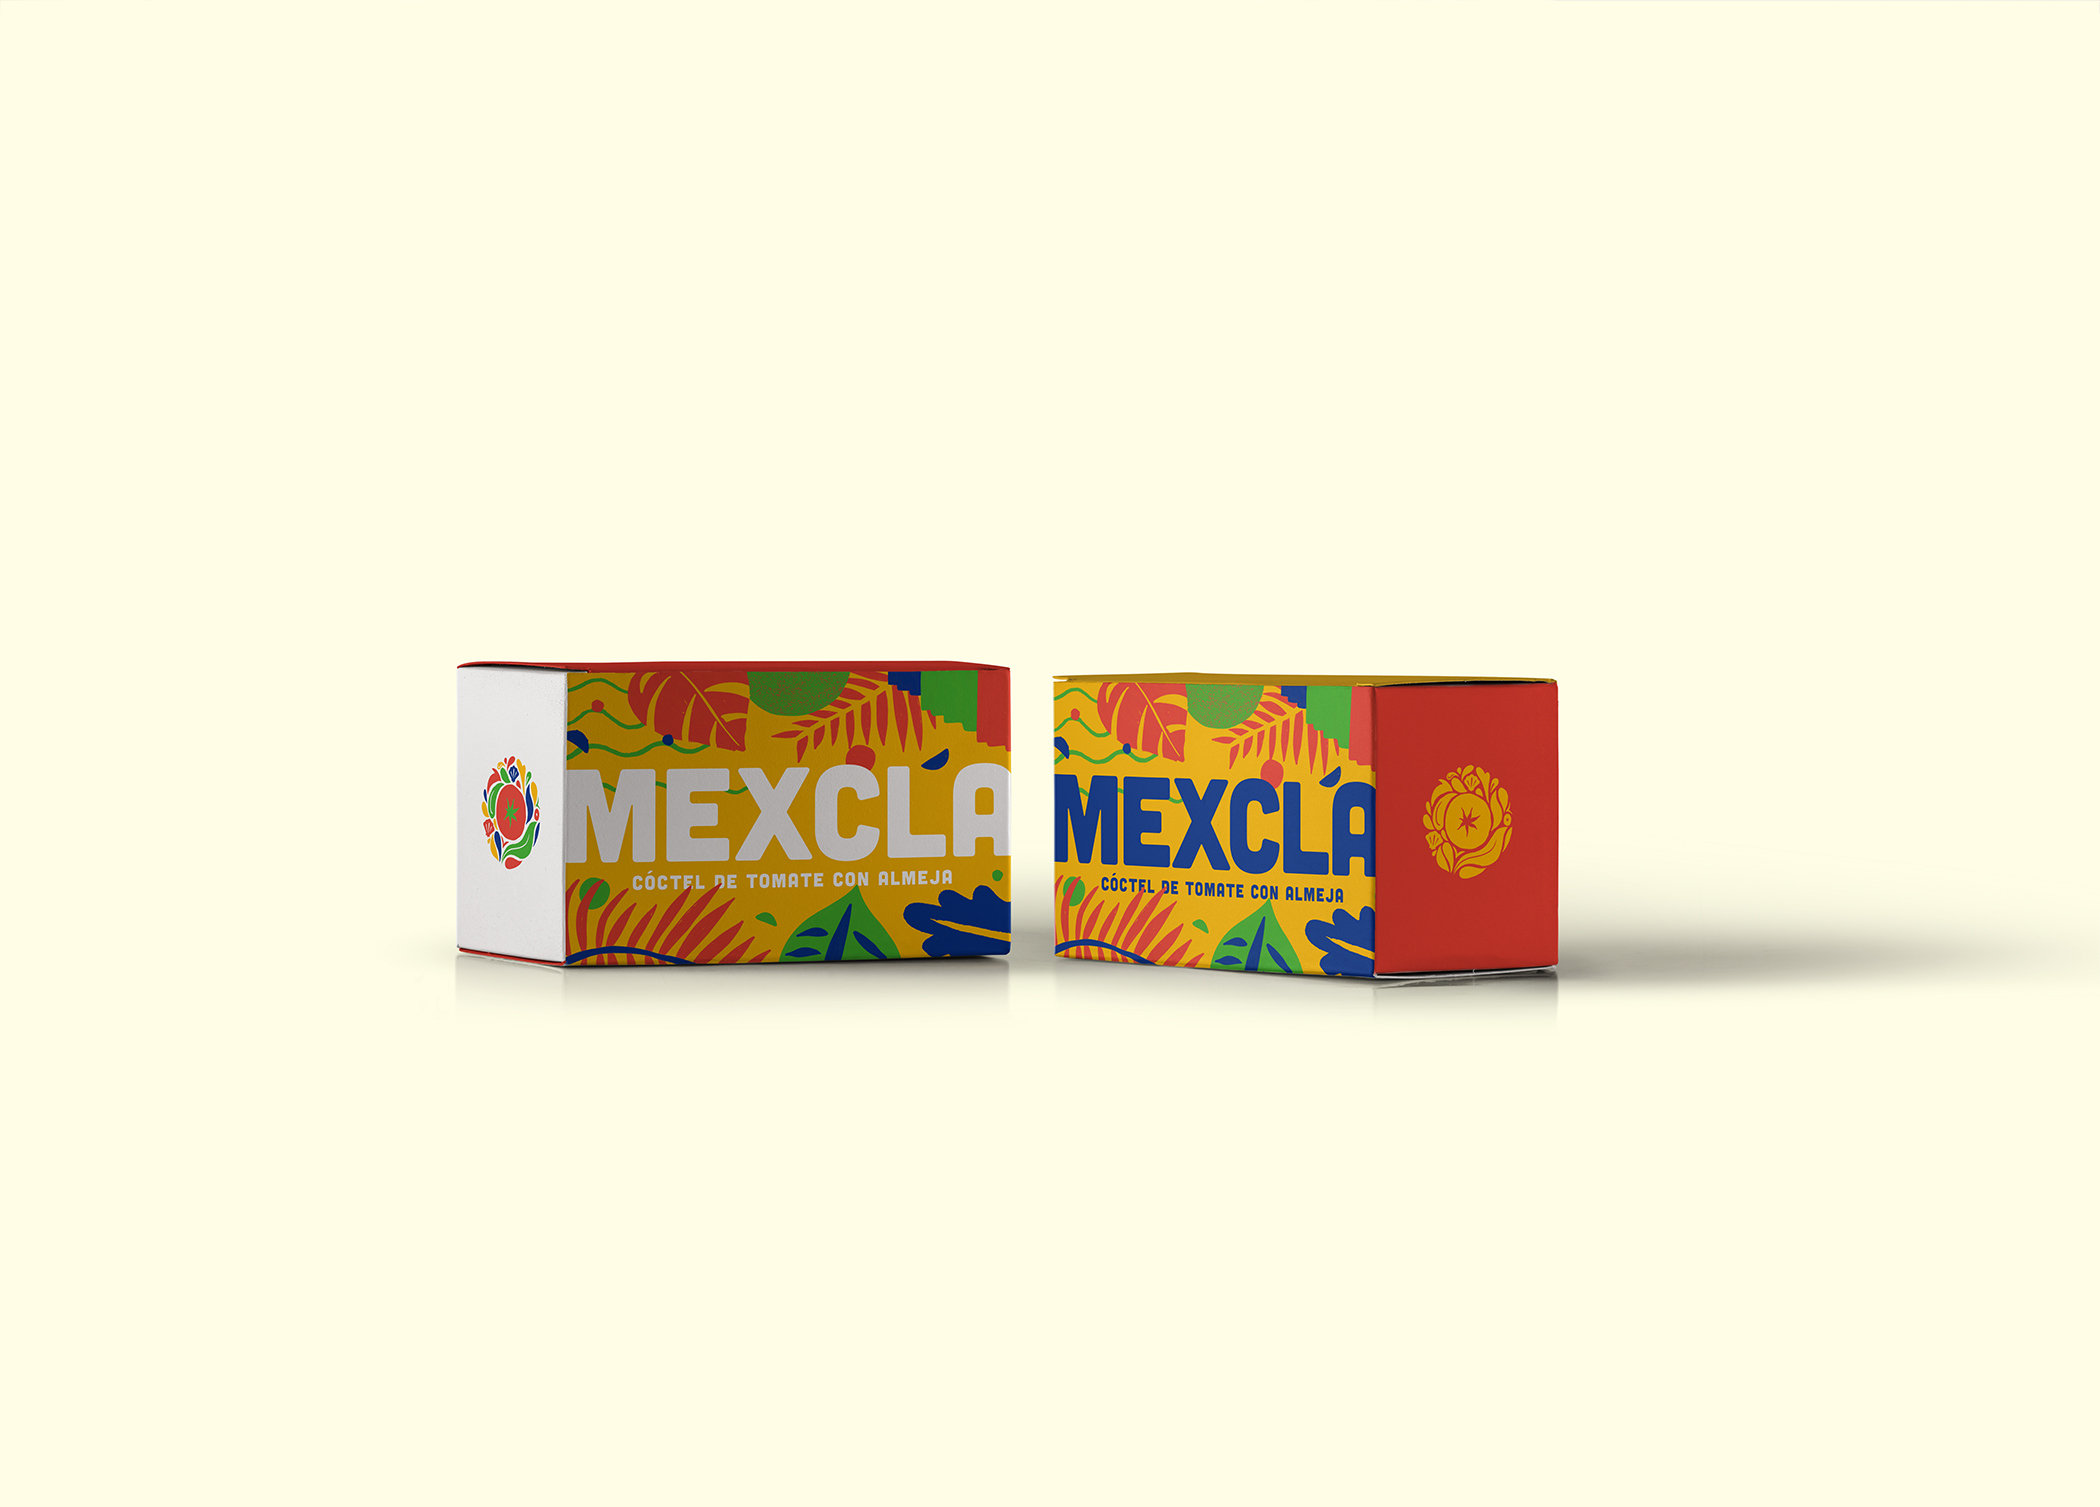 Design Agency Creates the Perfect Mexcla